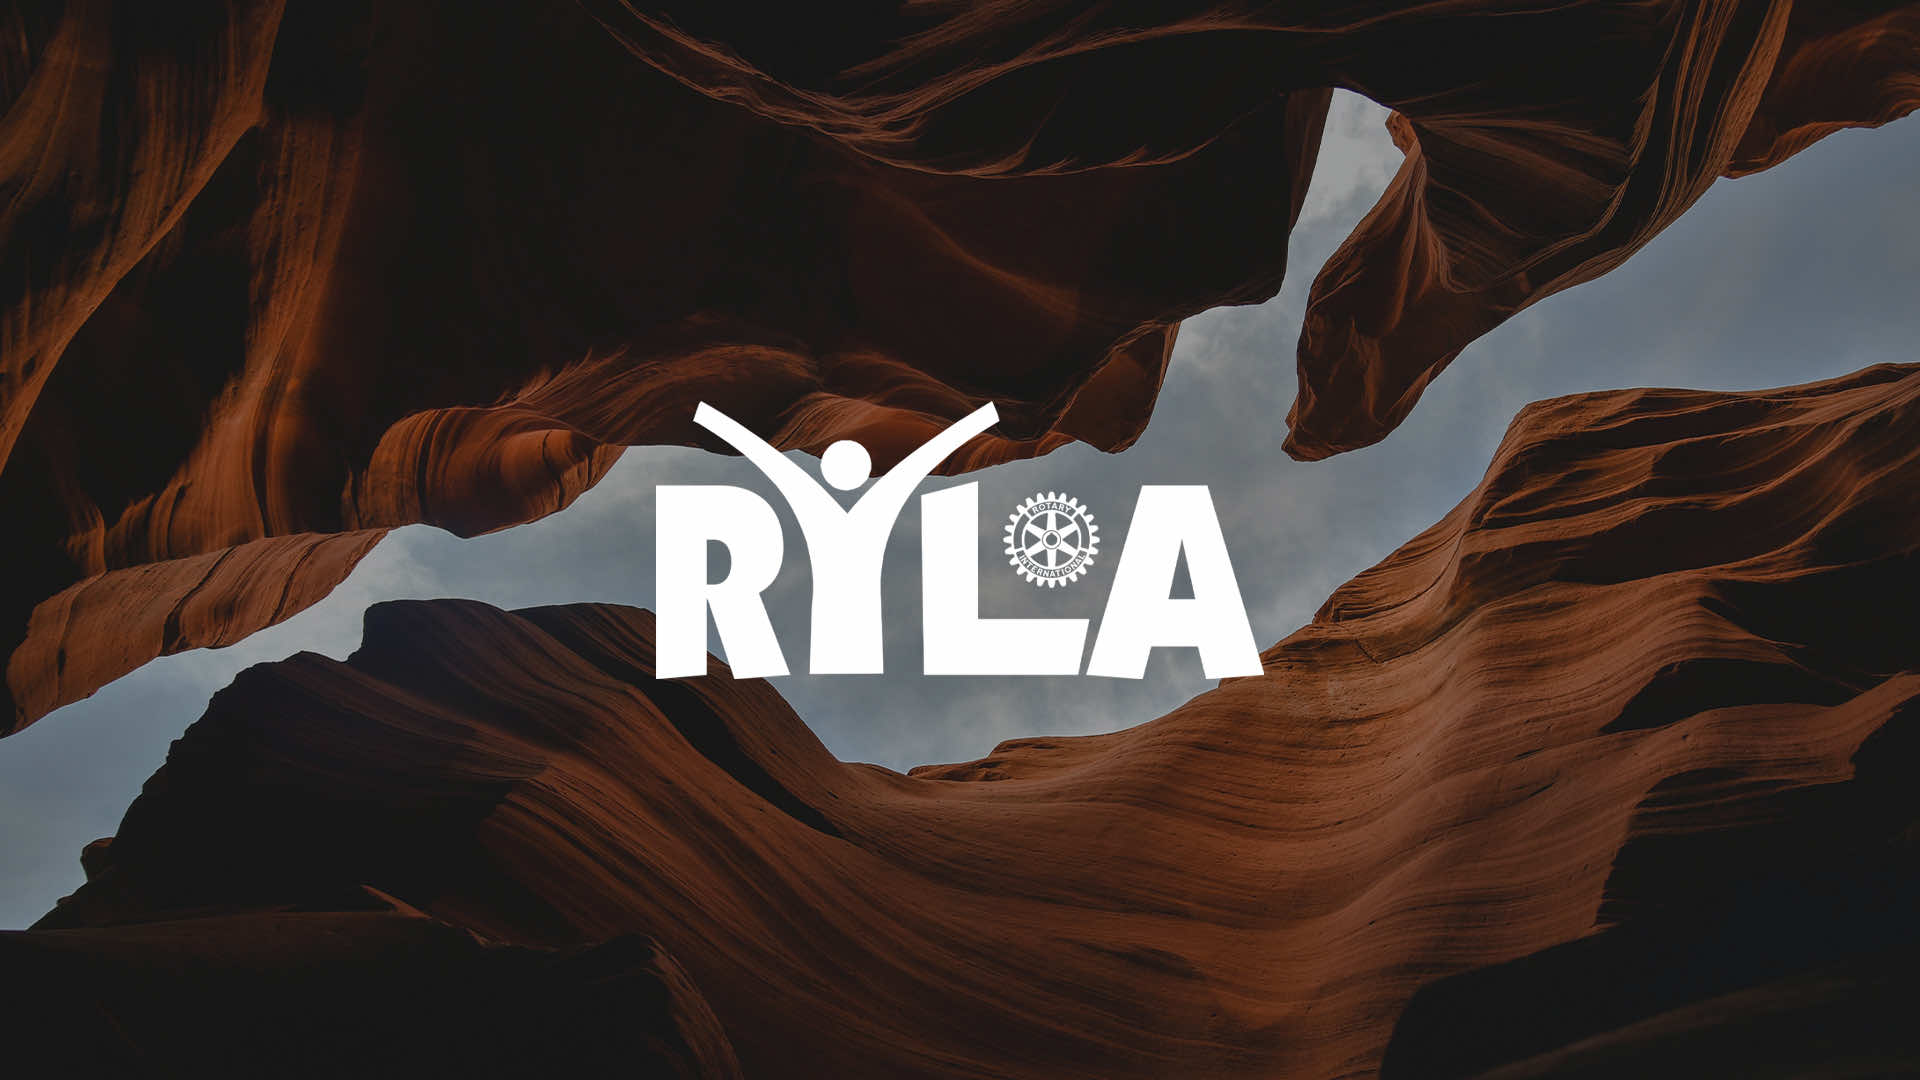 What's RYLA?